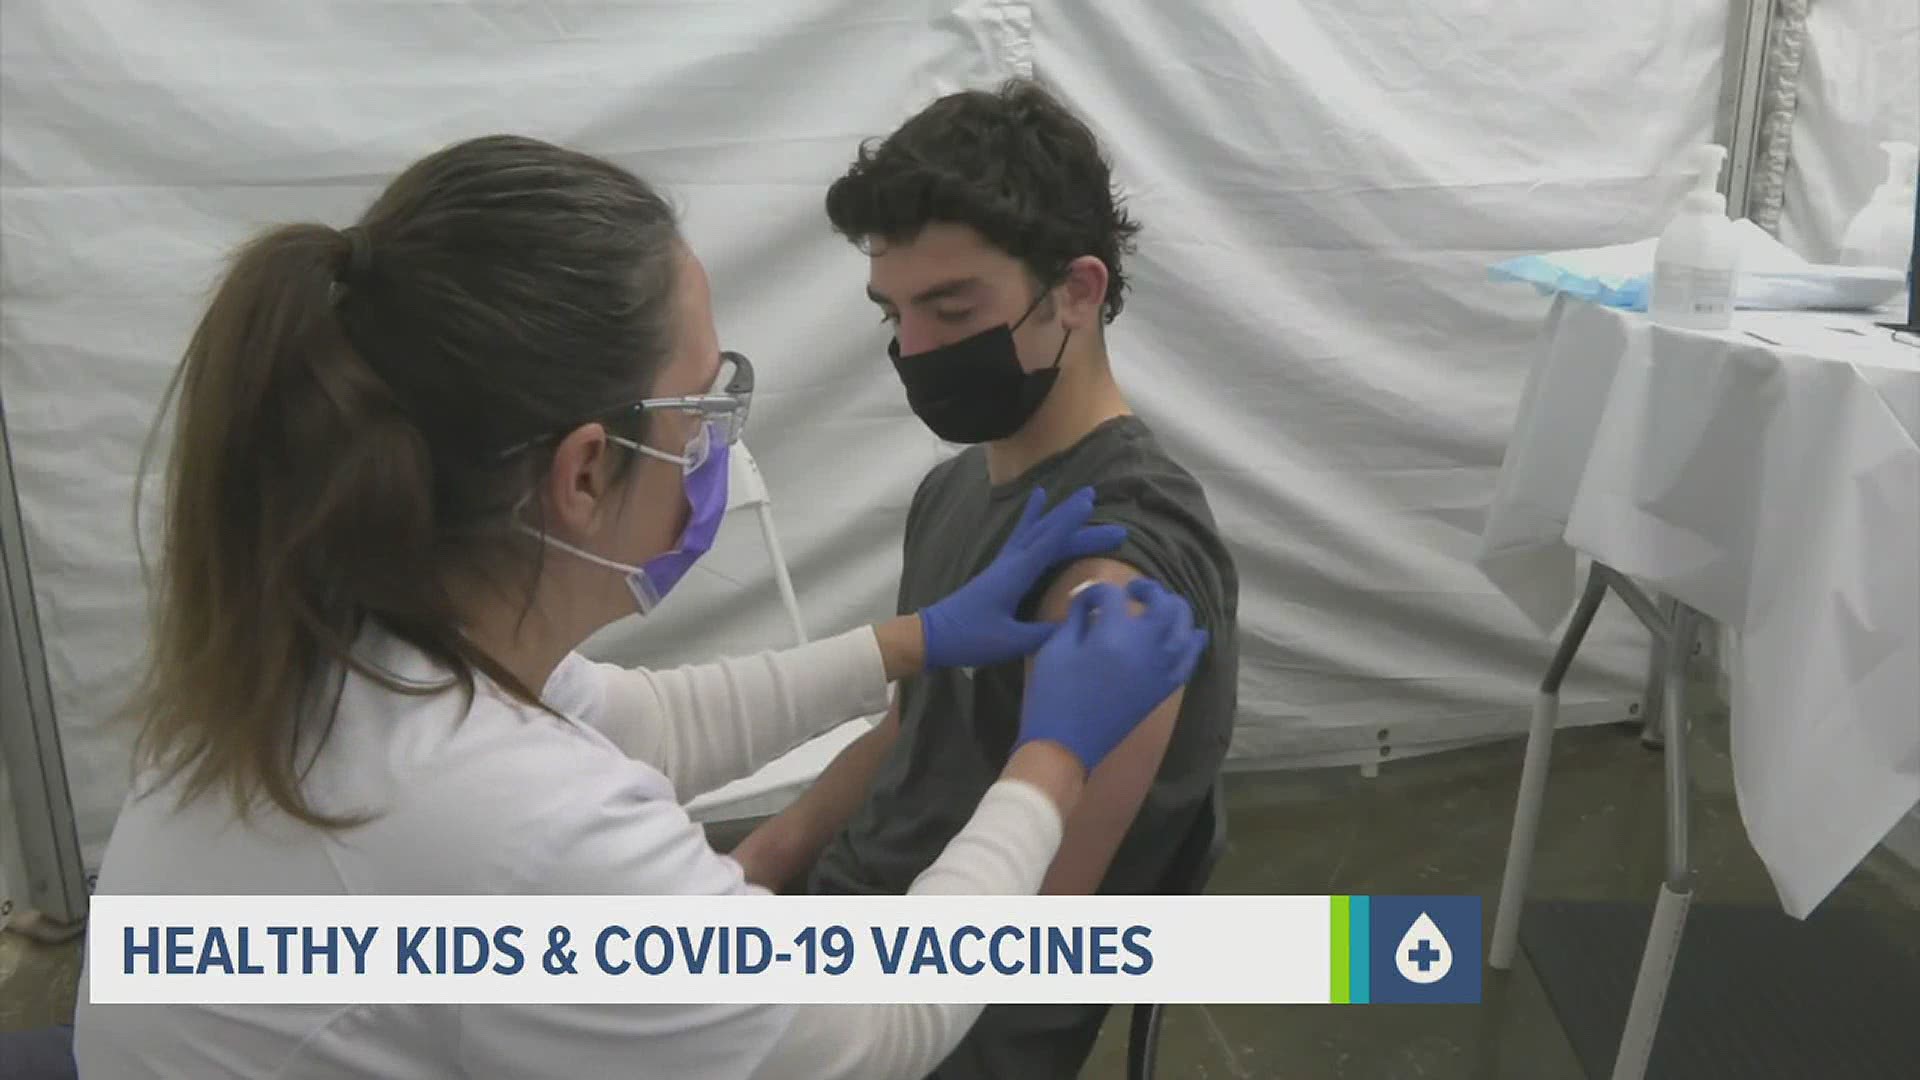 With reports of heart inflammation and the spread of the Delta variant, parents are understandably anxious about deciding whether or not to vaccinate their children.